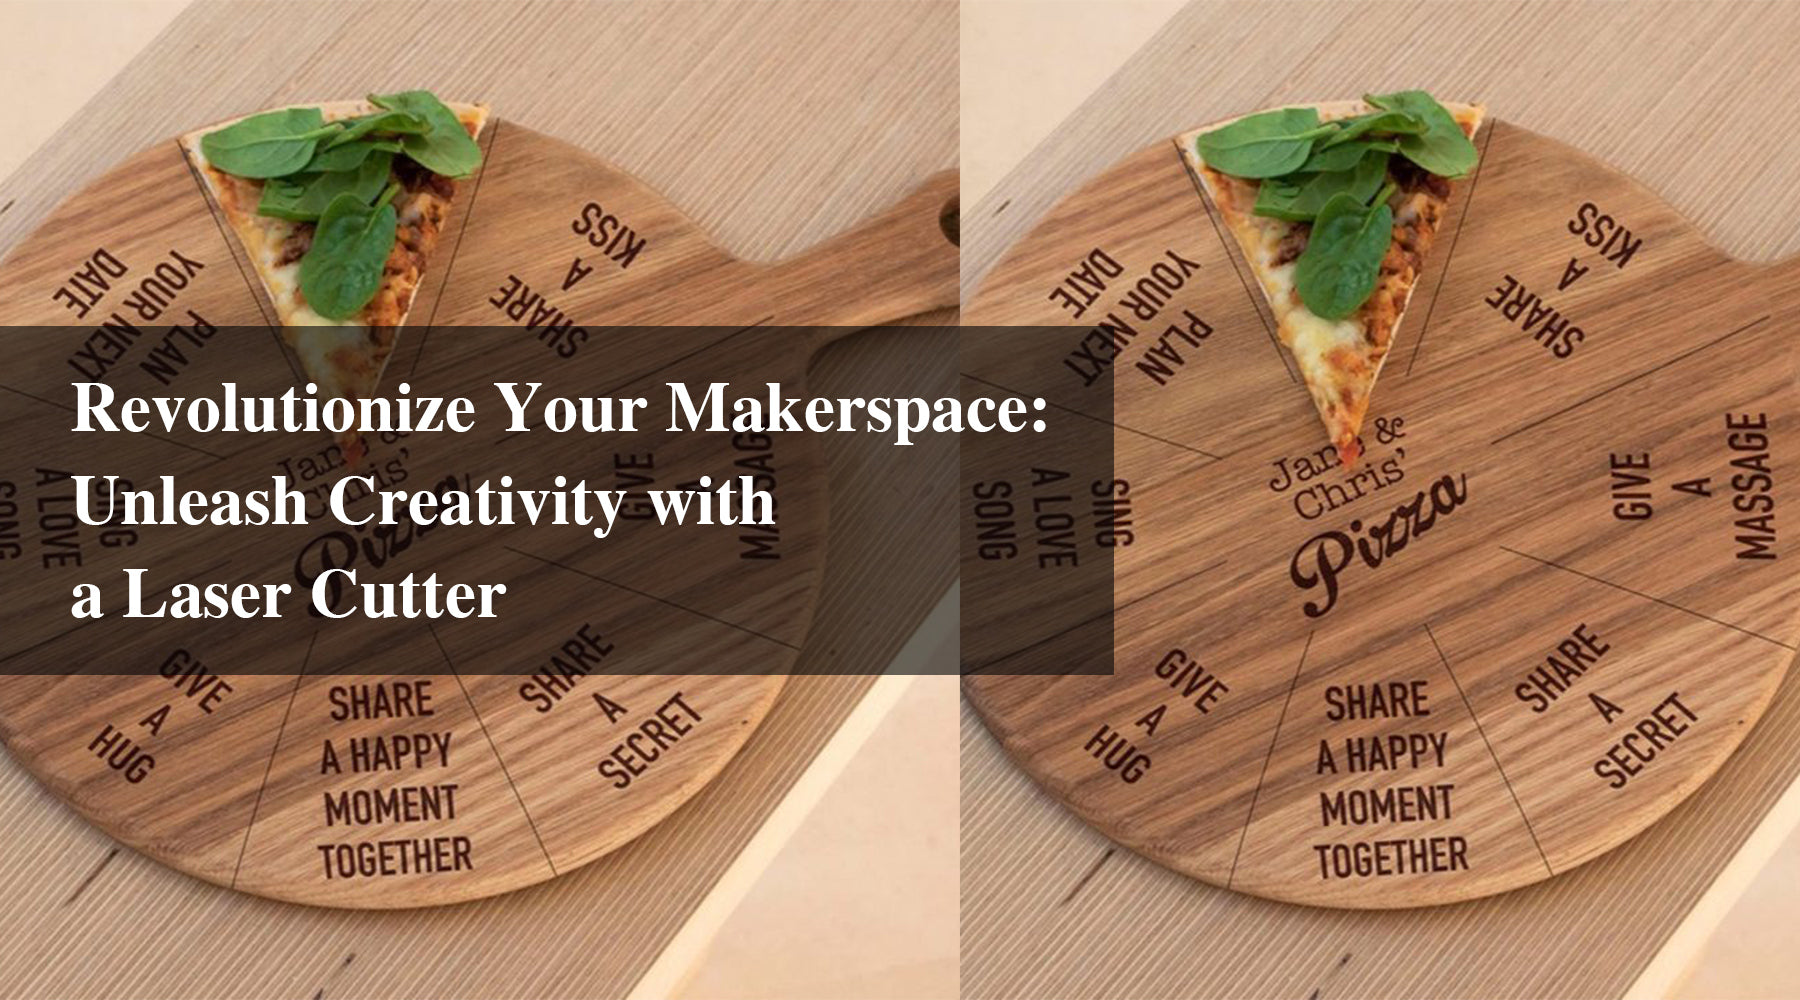 Revolutionize Your Makerspace: Unleash Creativity with a Laser Cutter